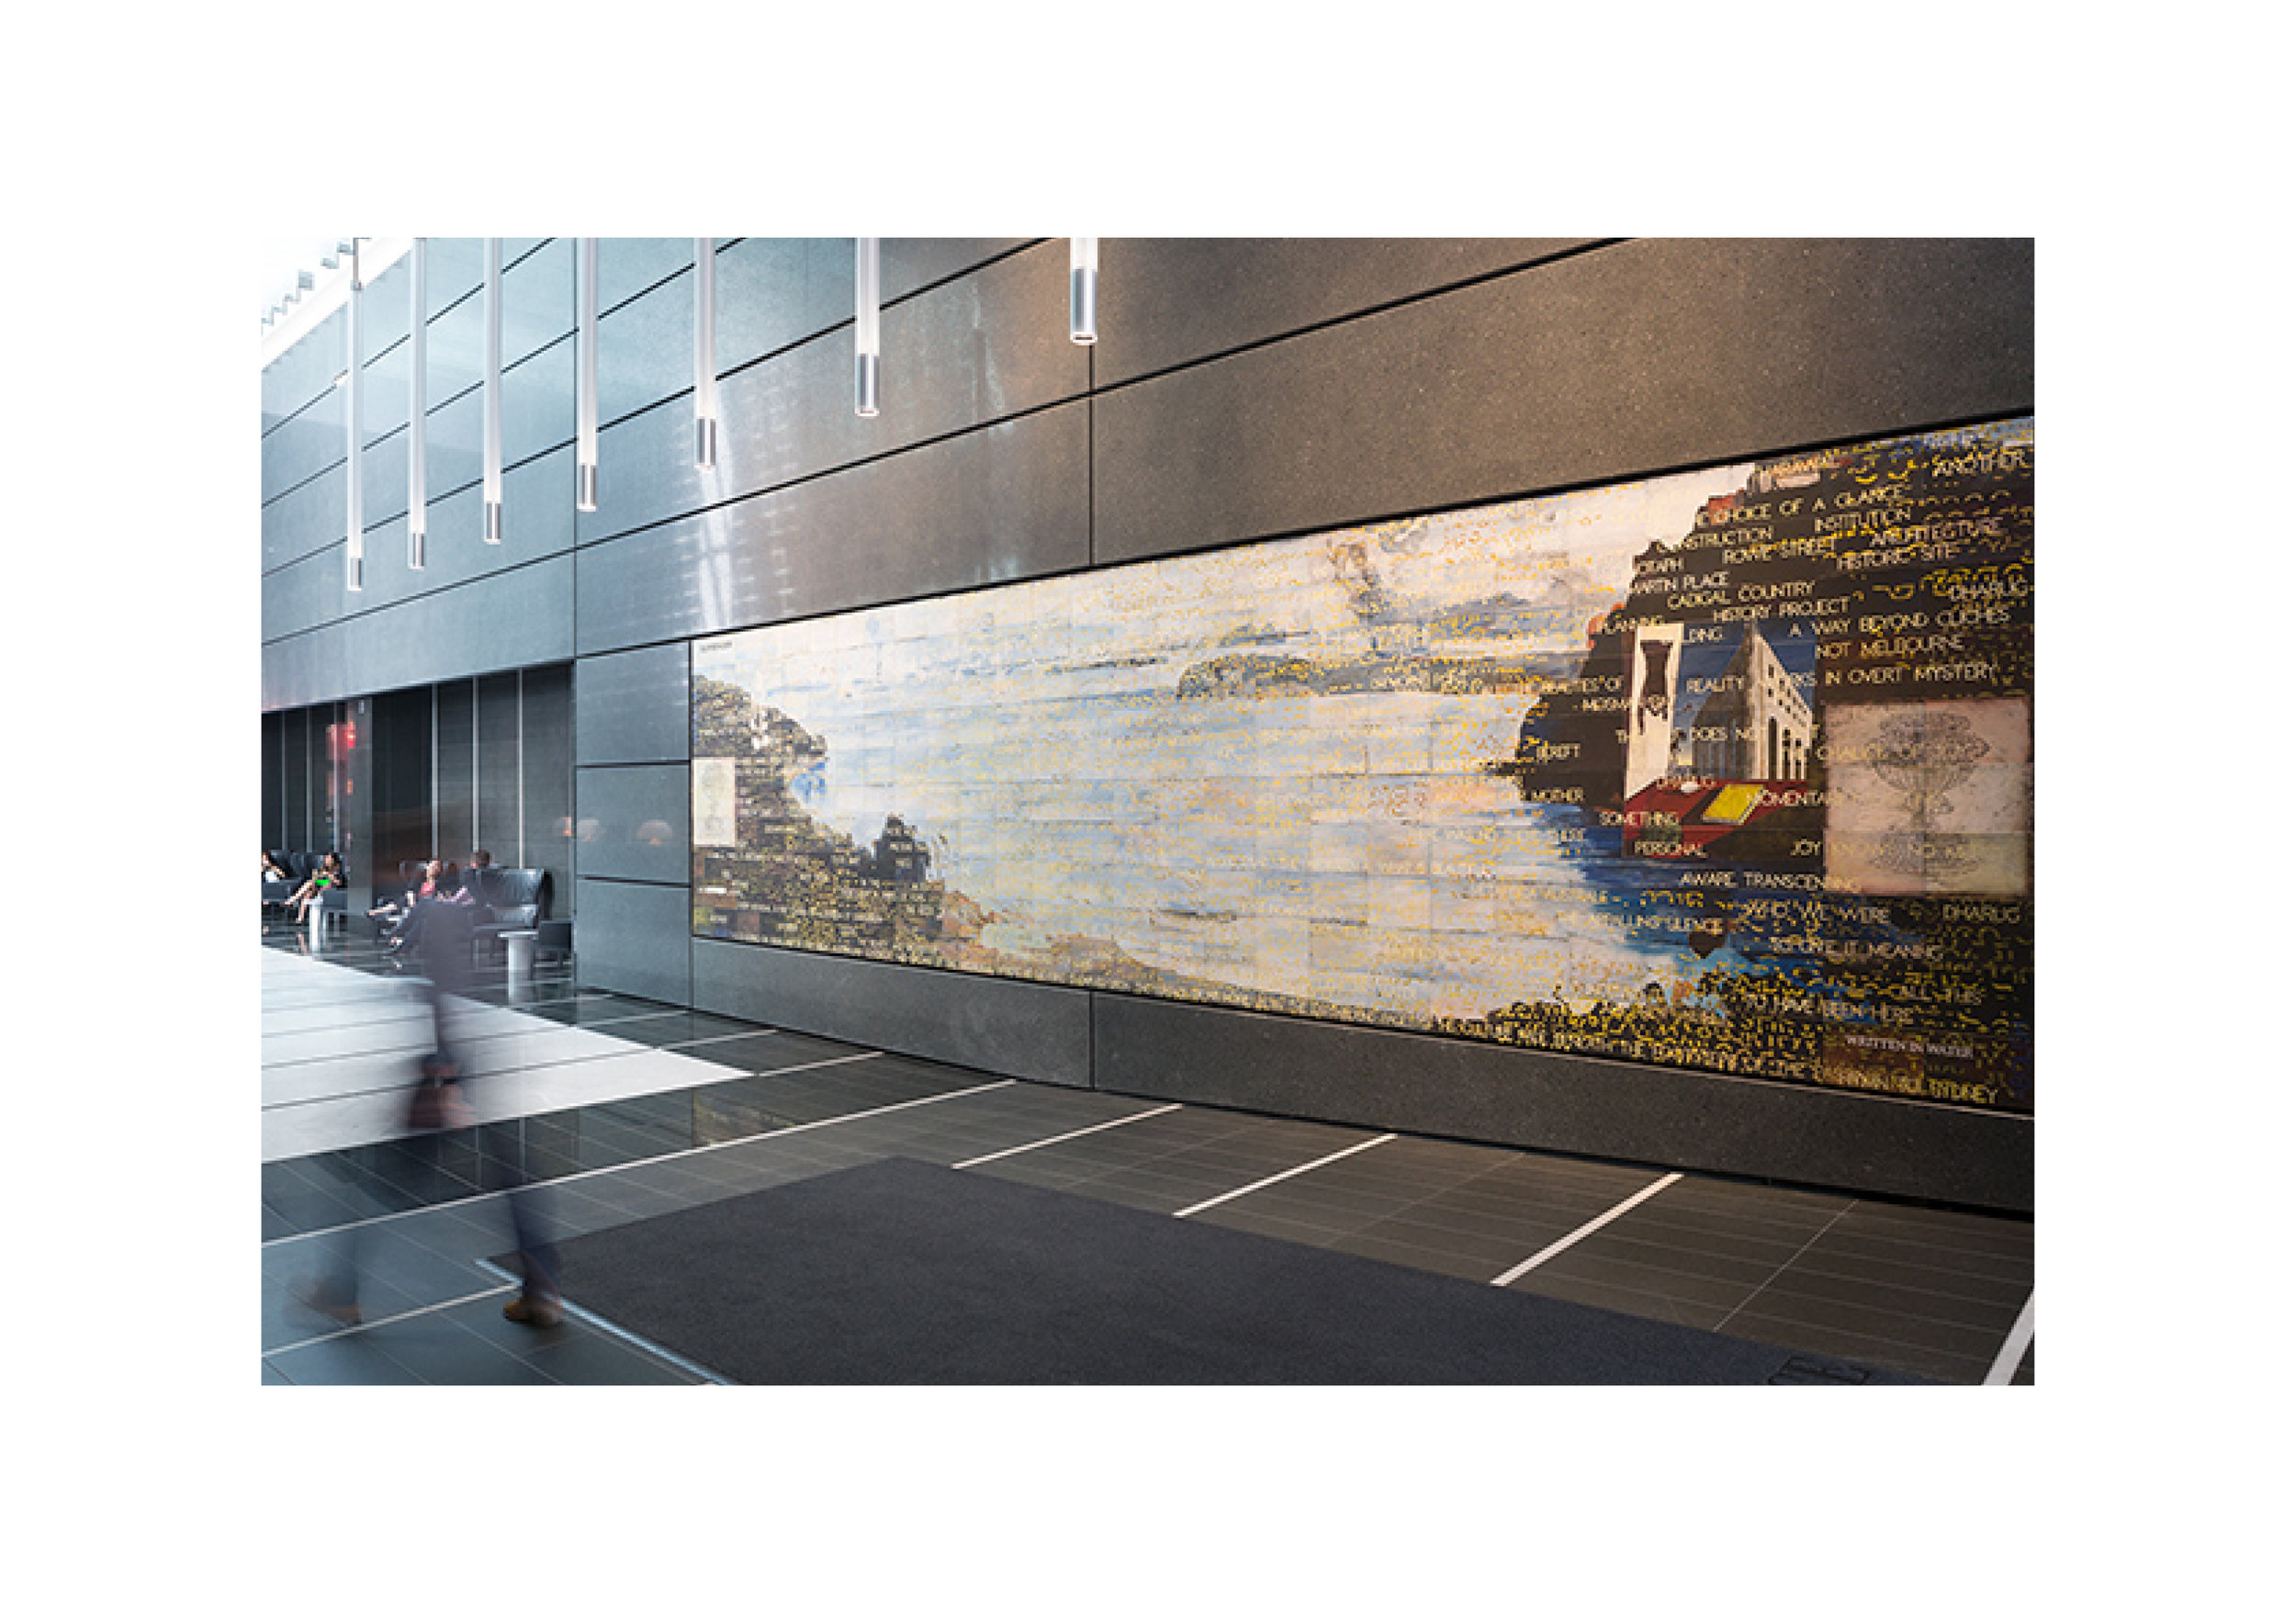  Imants Tillers   Written in Water (Hymn to Sydney) , 2014  Installation view synthetic polymer paint, gouache on 270 canvasboards, nos. 91939 - 92208 254 x 960 cm Collection: 5 Martin Place, Commonwealth Bank Building, Sydney 